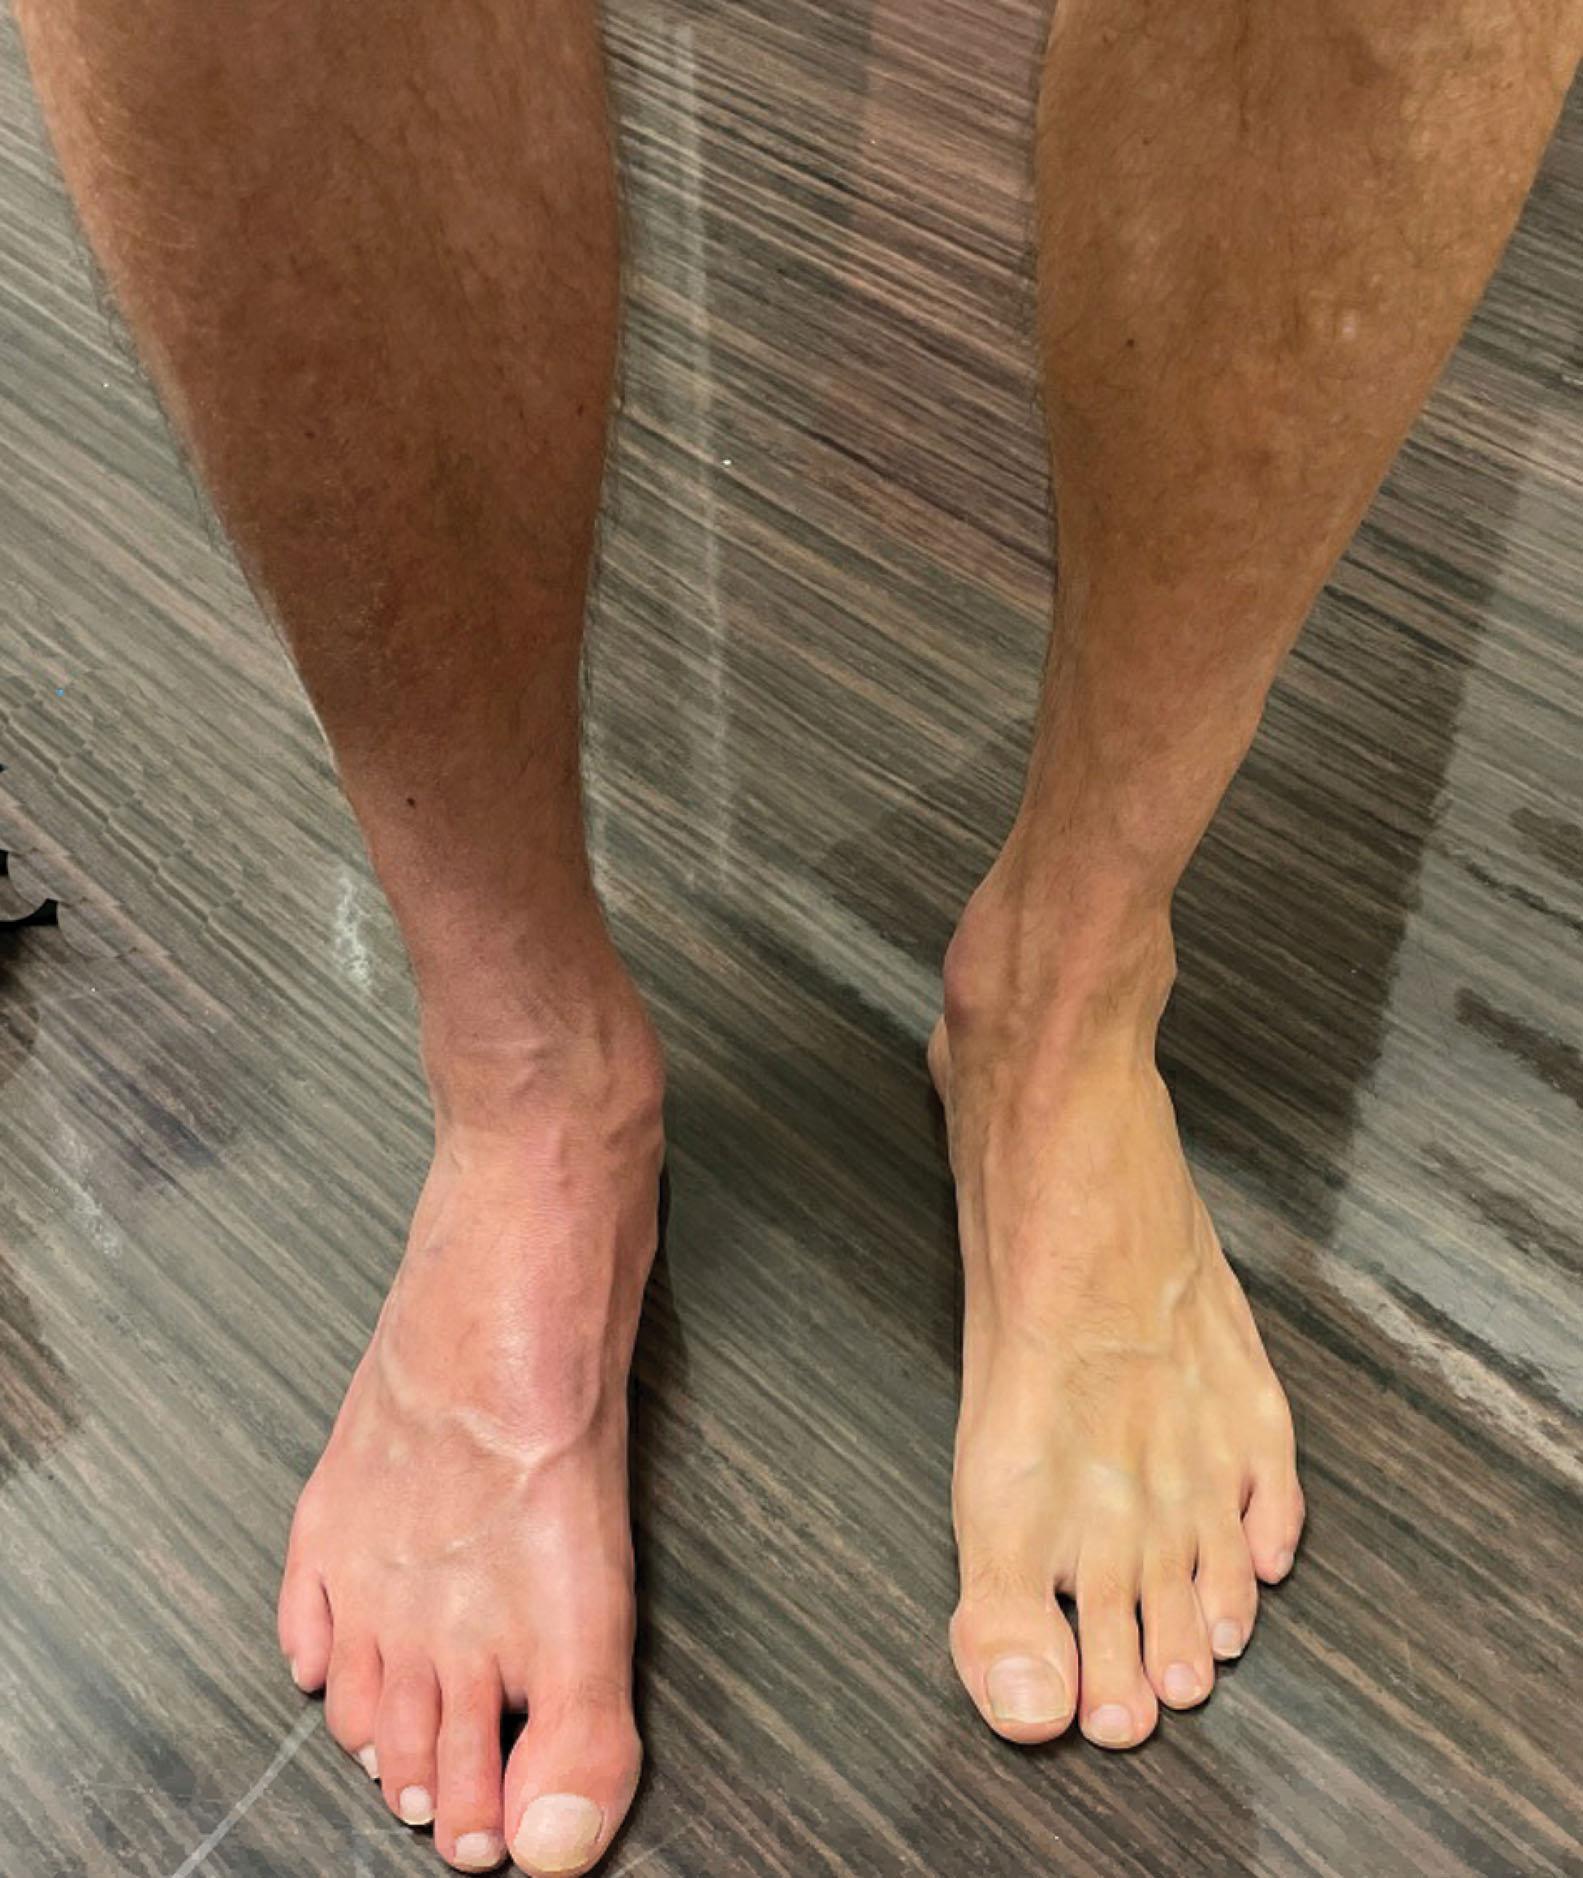 Fig. 20-1, Photograph of a 35-year-old man with classic signs of complex regional pain syndrome including swelling, redness, joint stiffness, and temperature change 8 weeks after sustaining a calf contusion playing soccer.